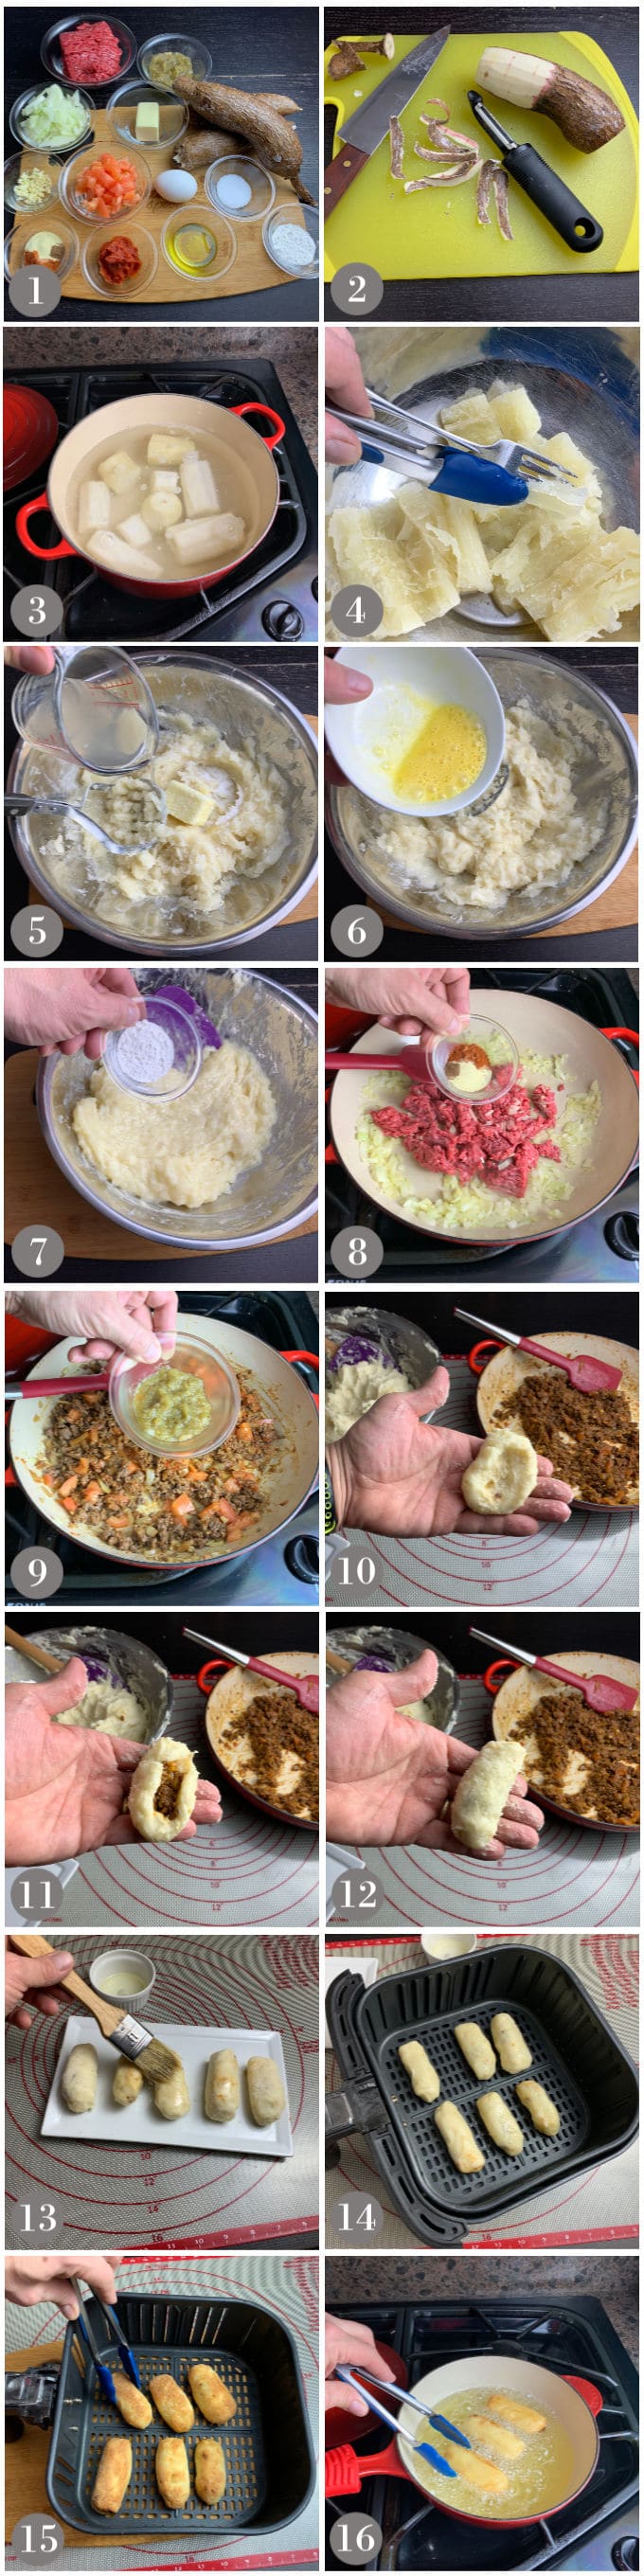 A collage of photos showing the steps to make Panamanian yuca fritters - carimañolas.